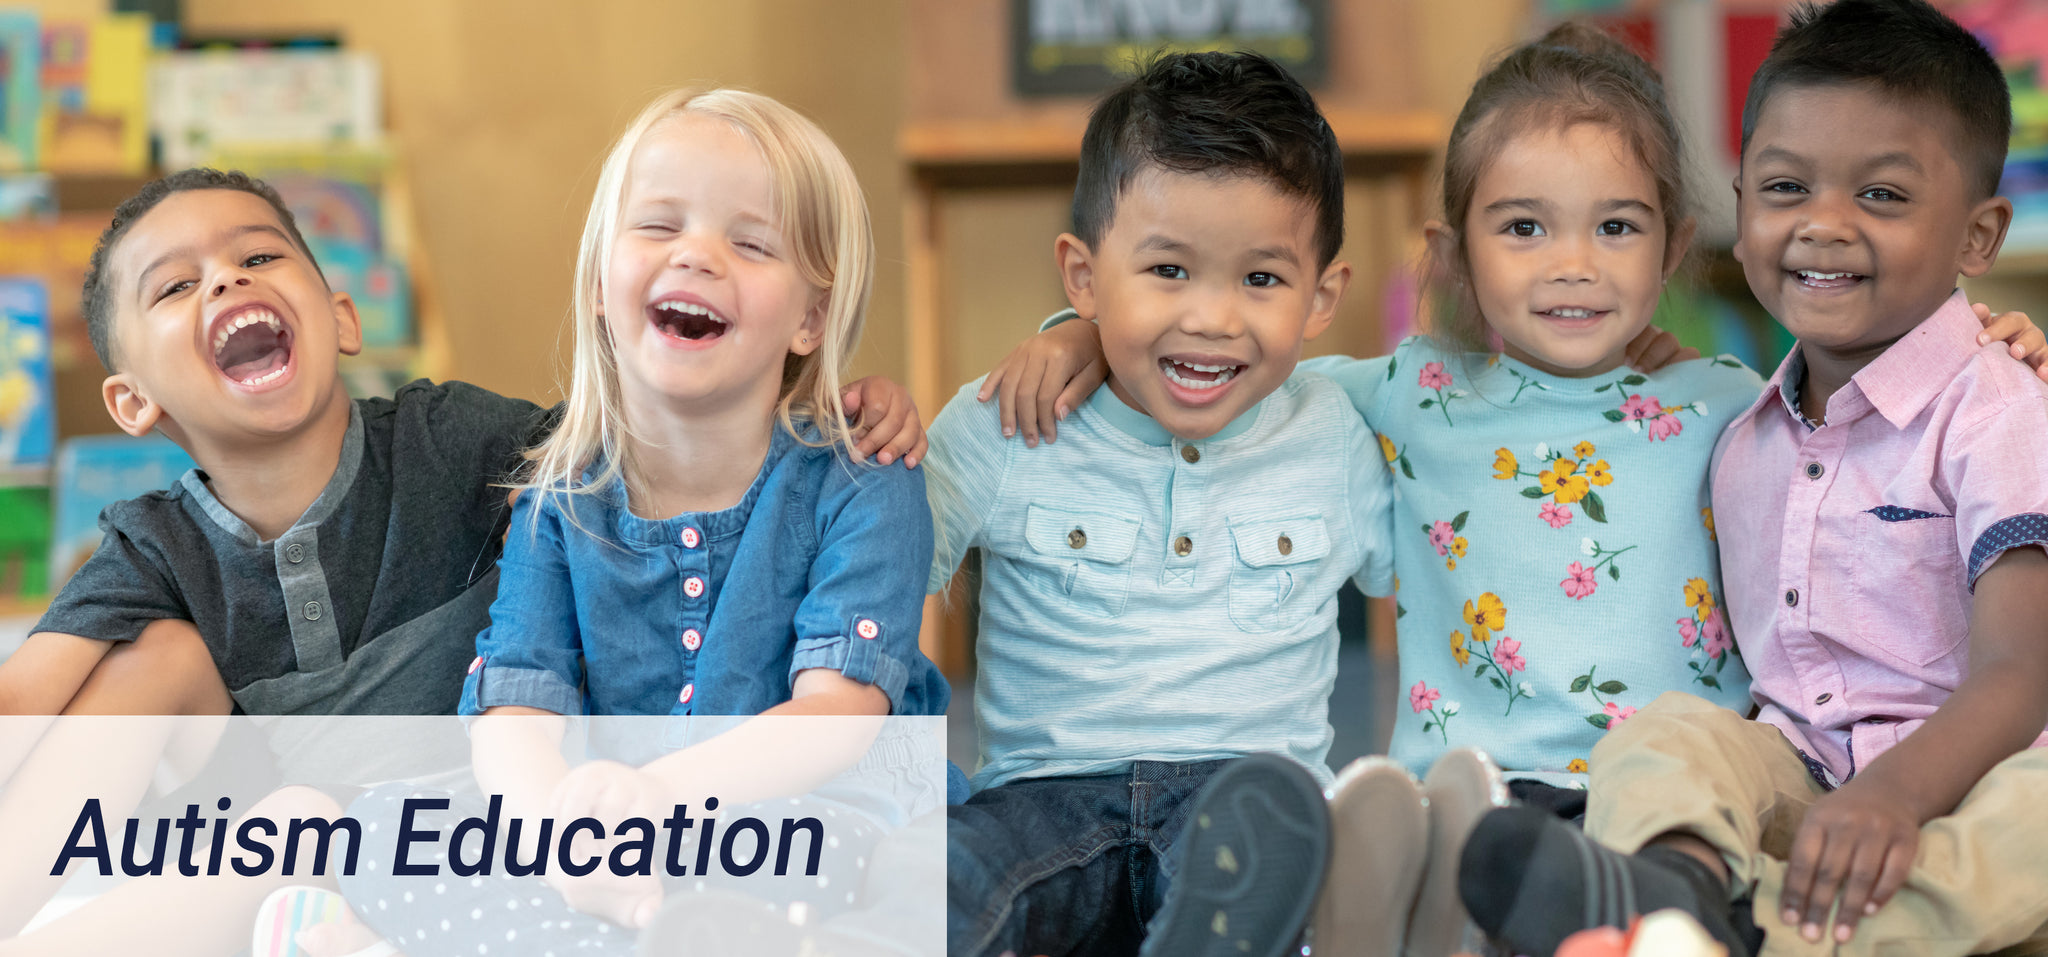 Happy Kids in Preschool with text that says autism education